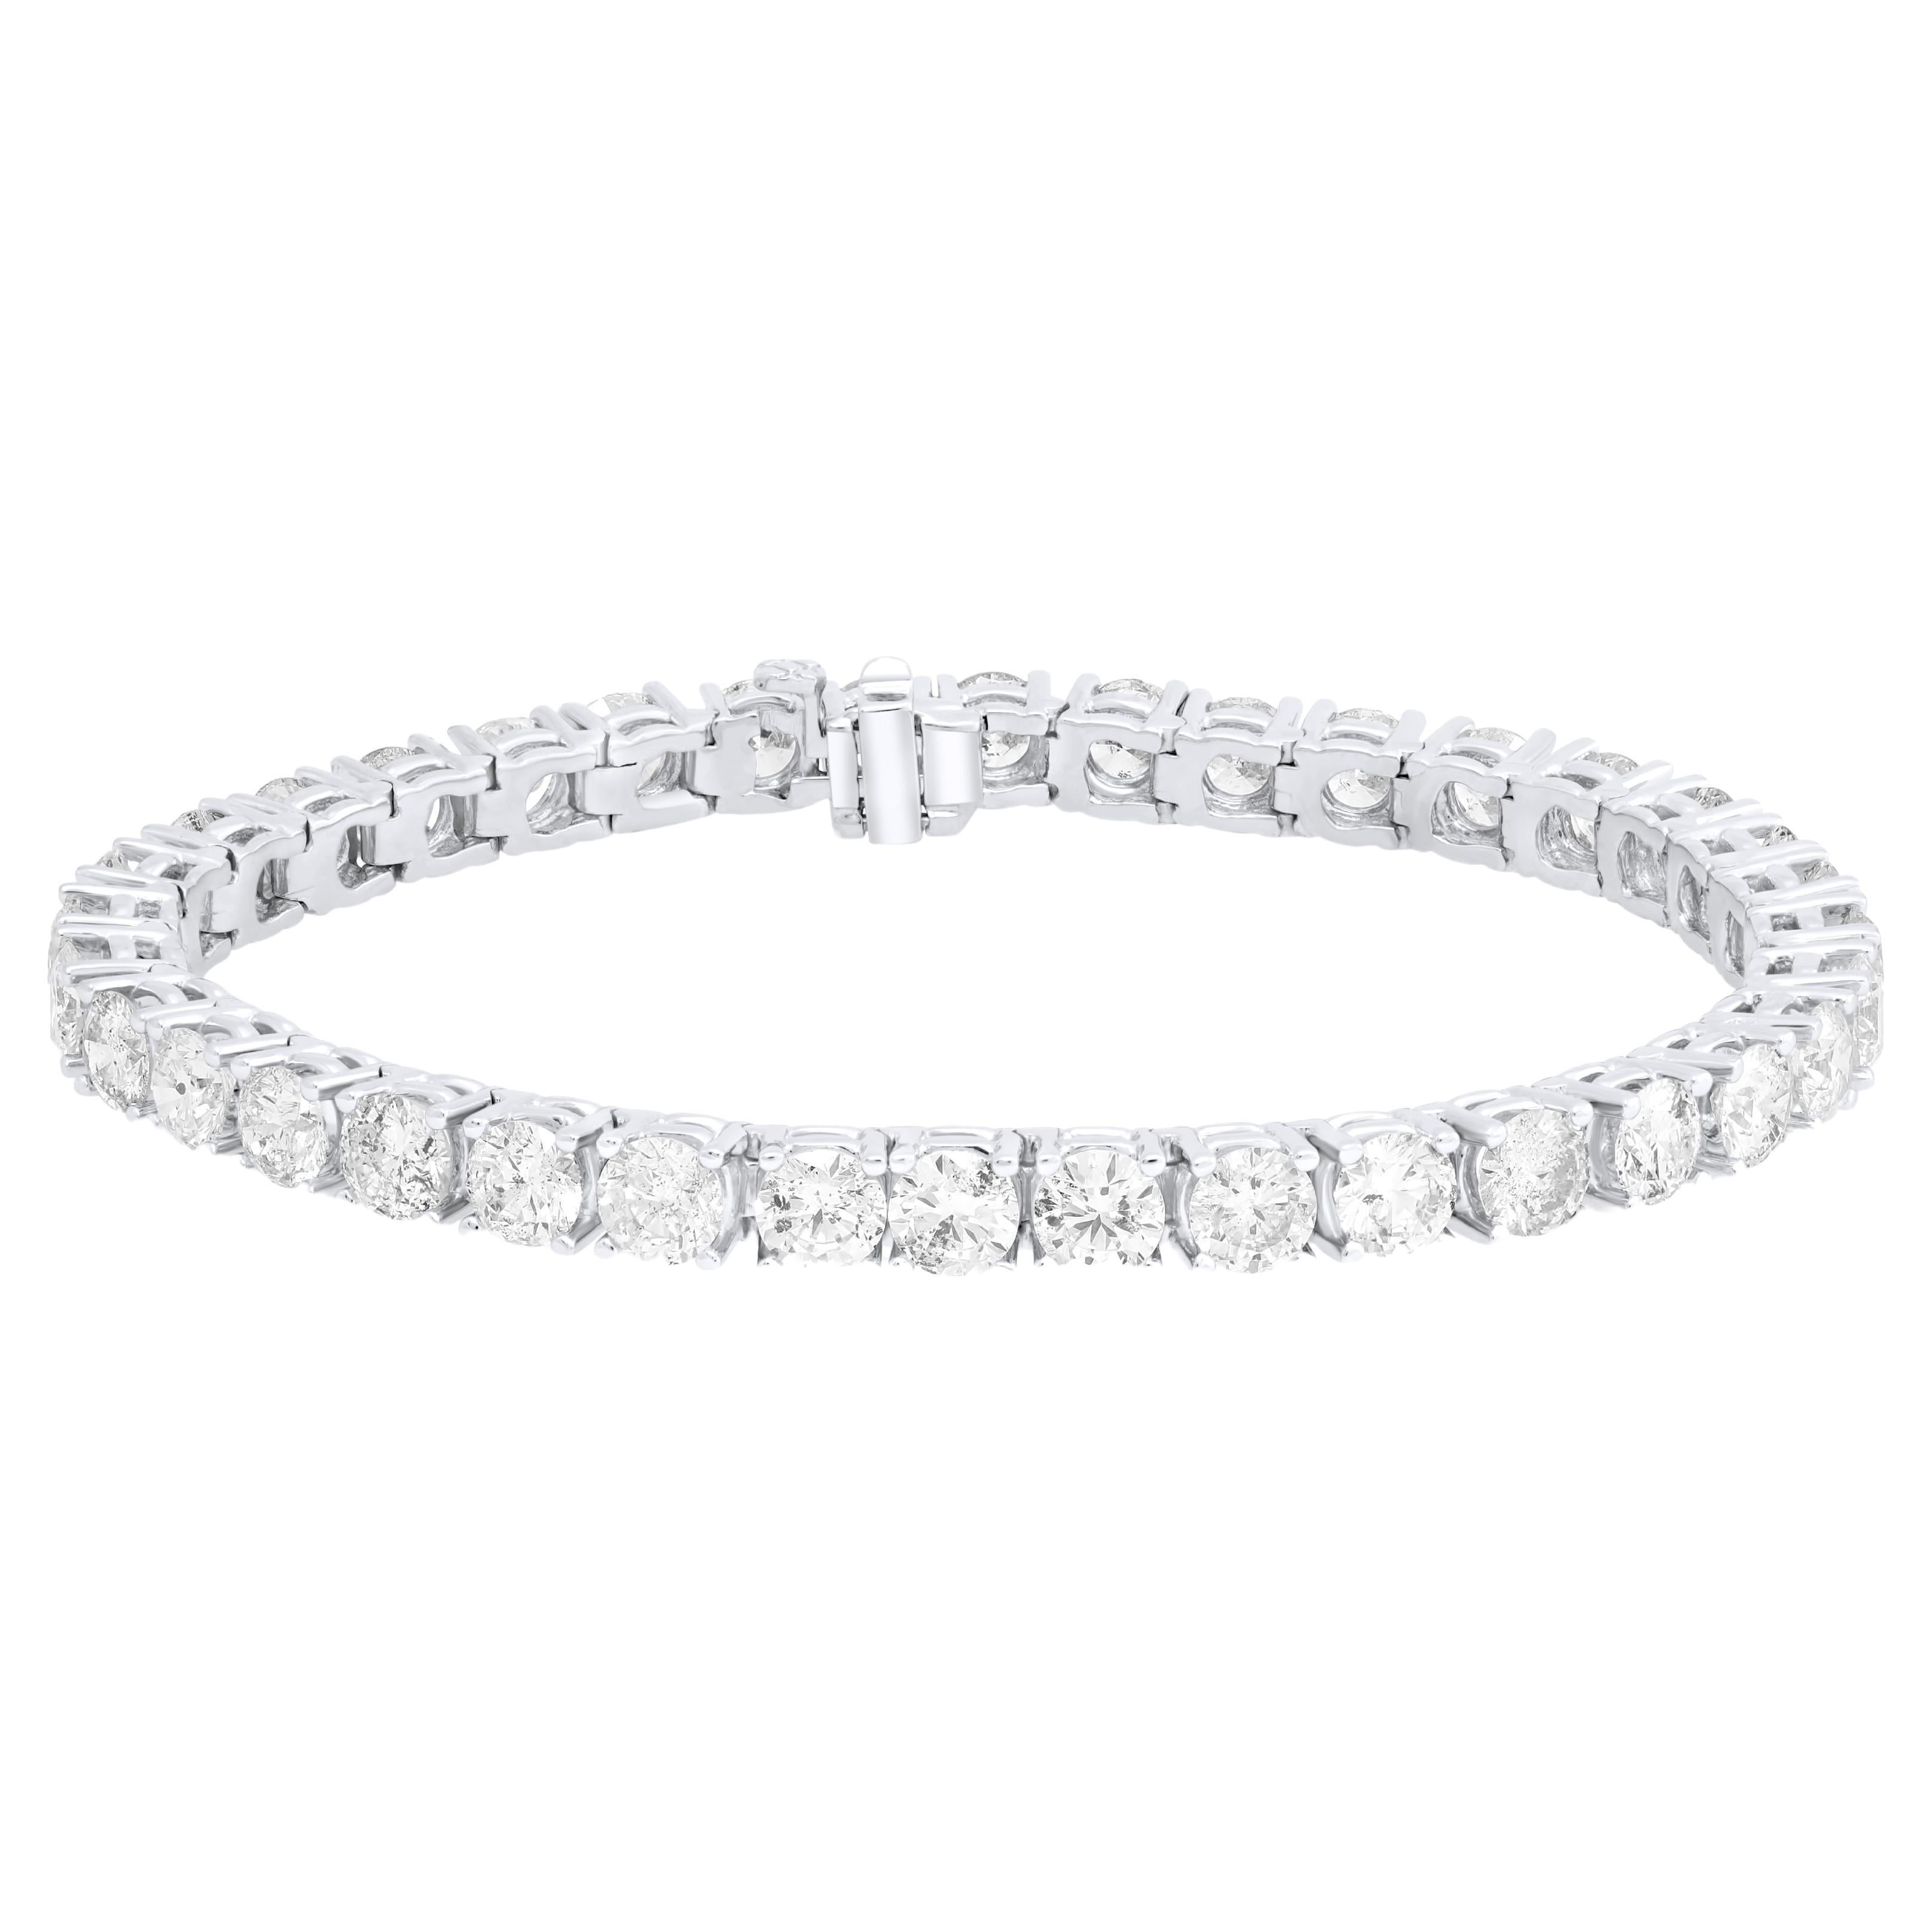 Diana M.18 kt white gold 4 prong diamond tennis bracelet adorned with 12.01 cts 